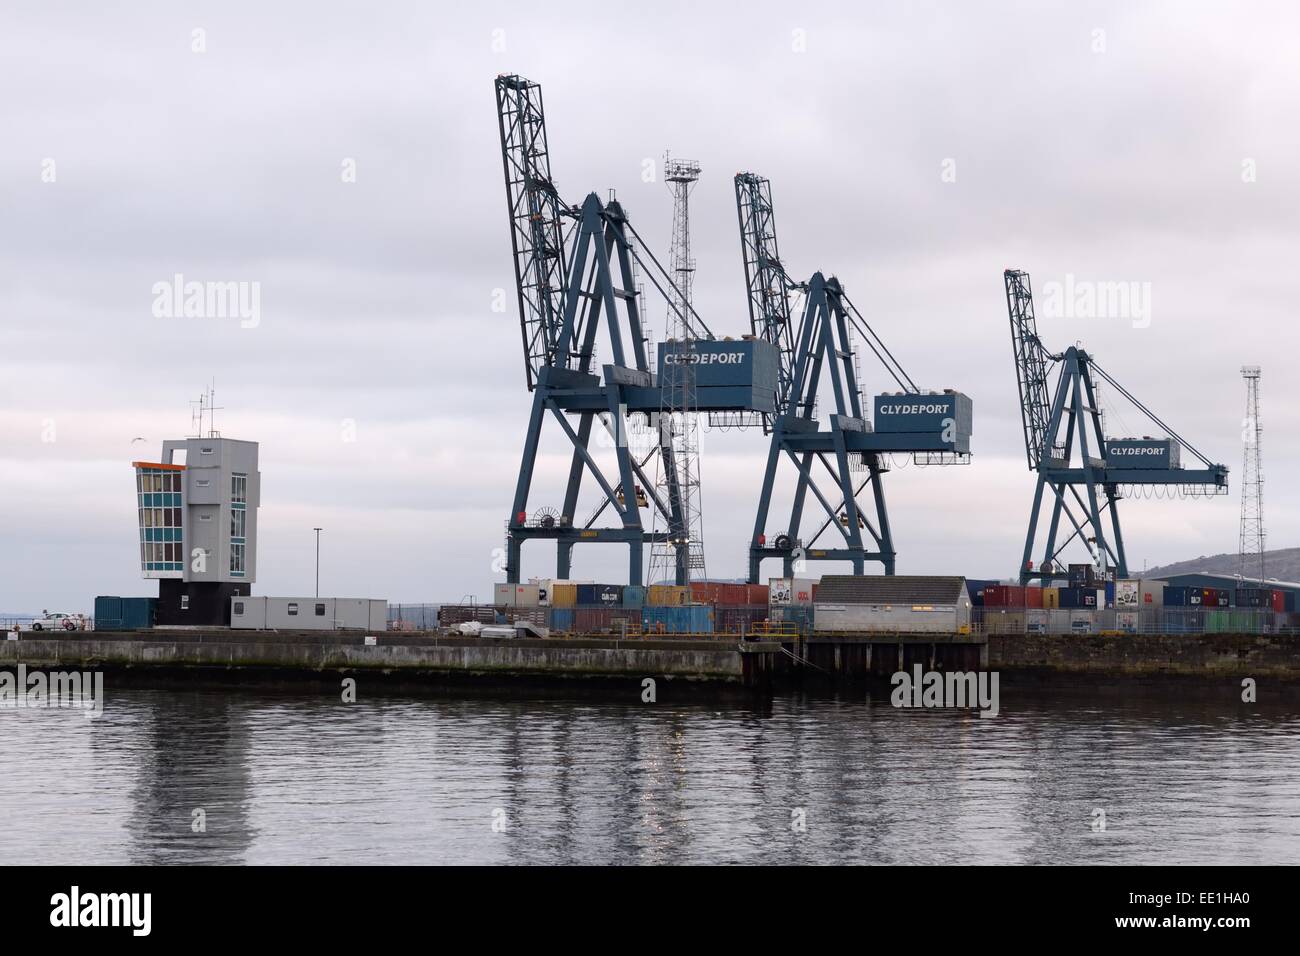 Clydeport cranes at the terminal in Greenock, Scotland, UK Stock Photo